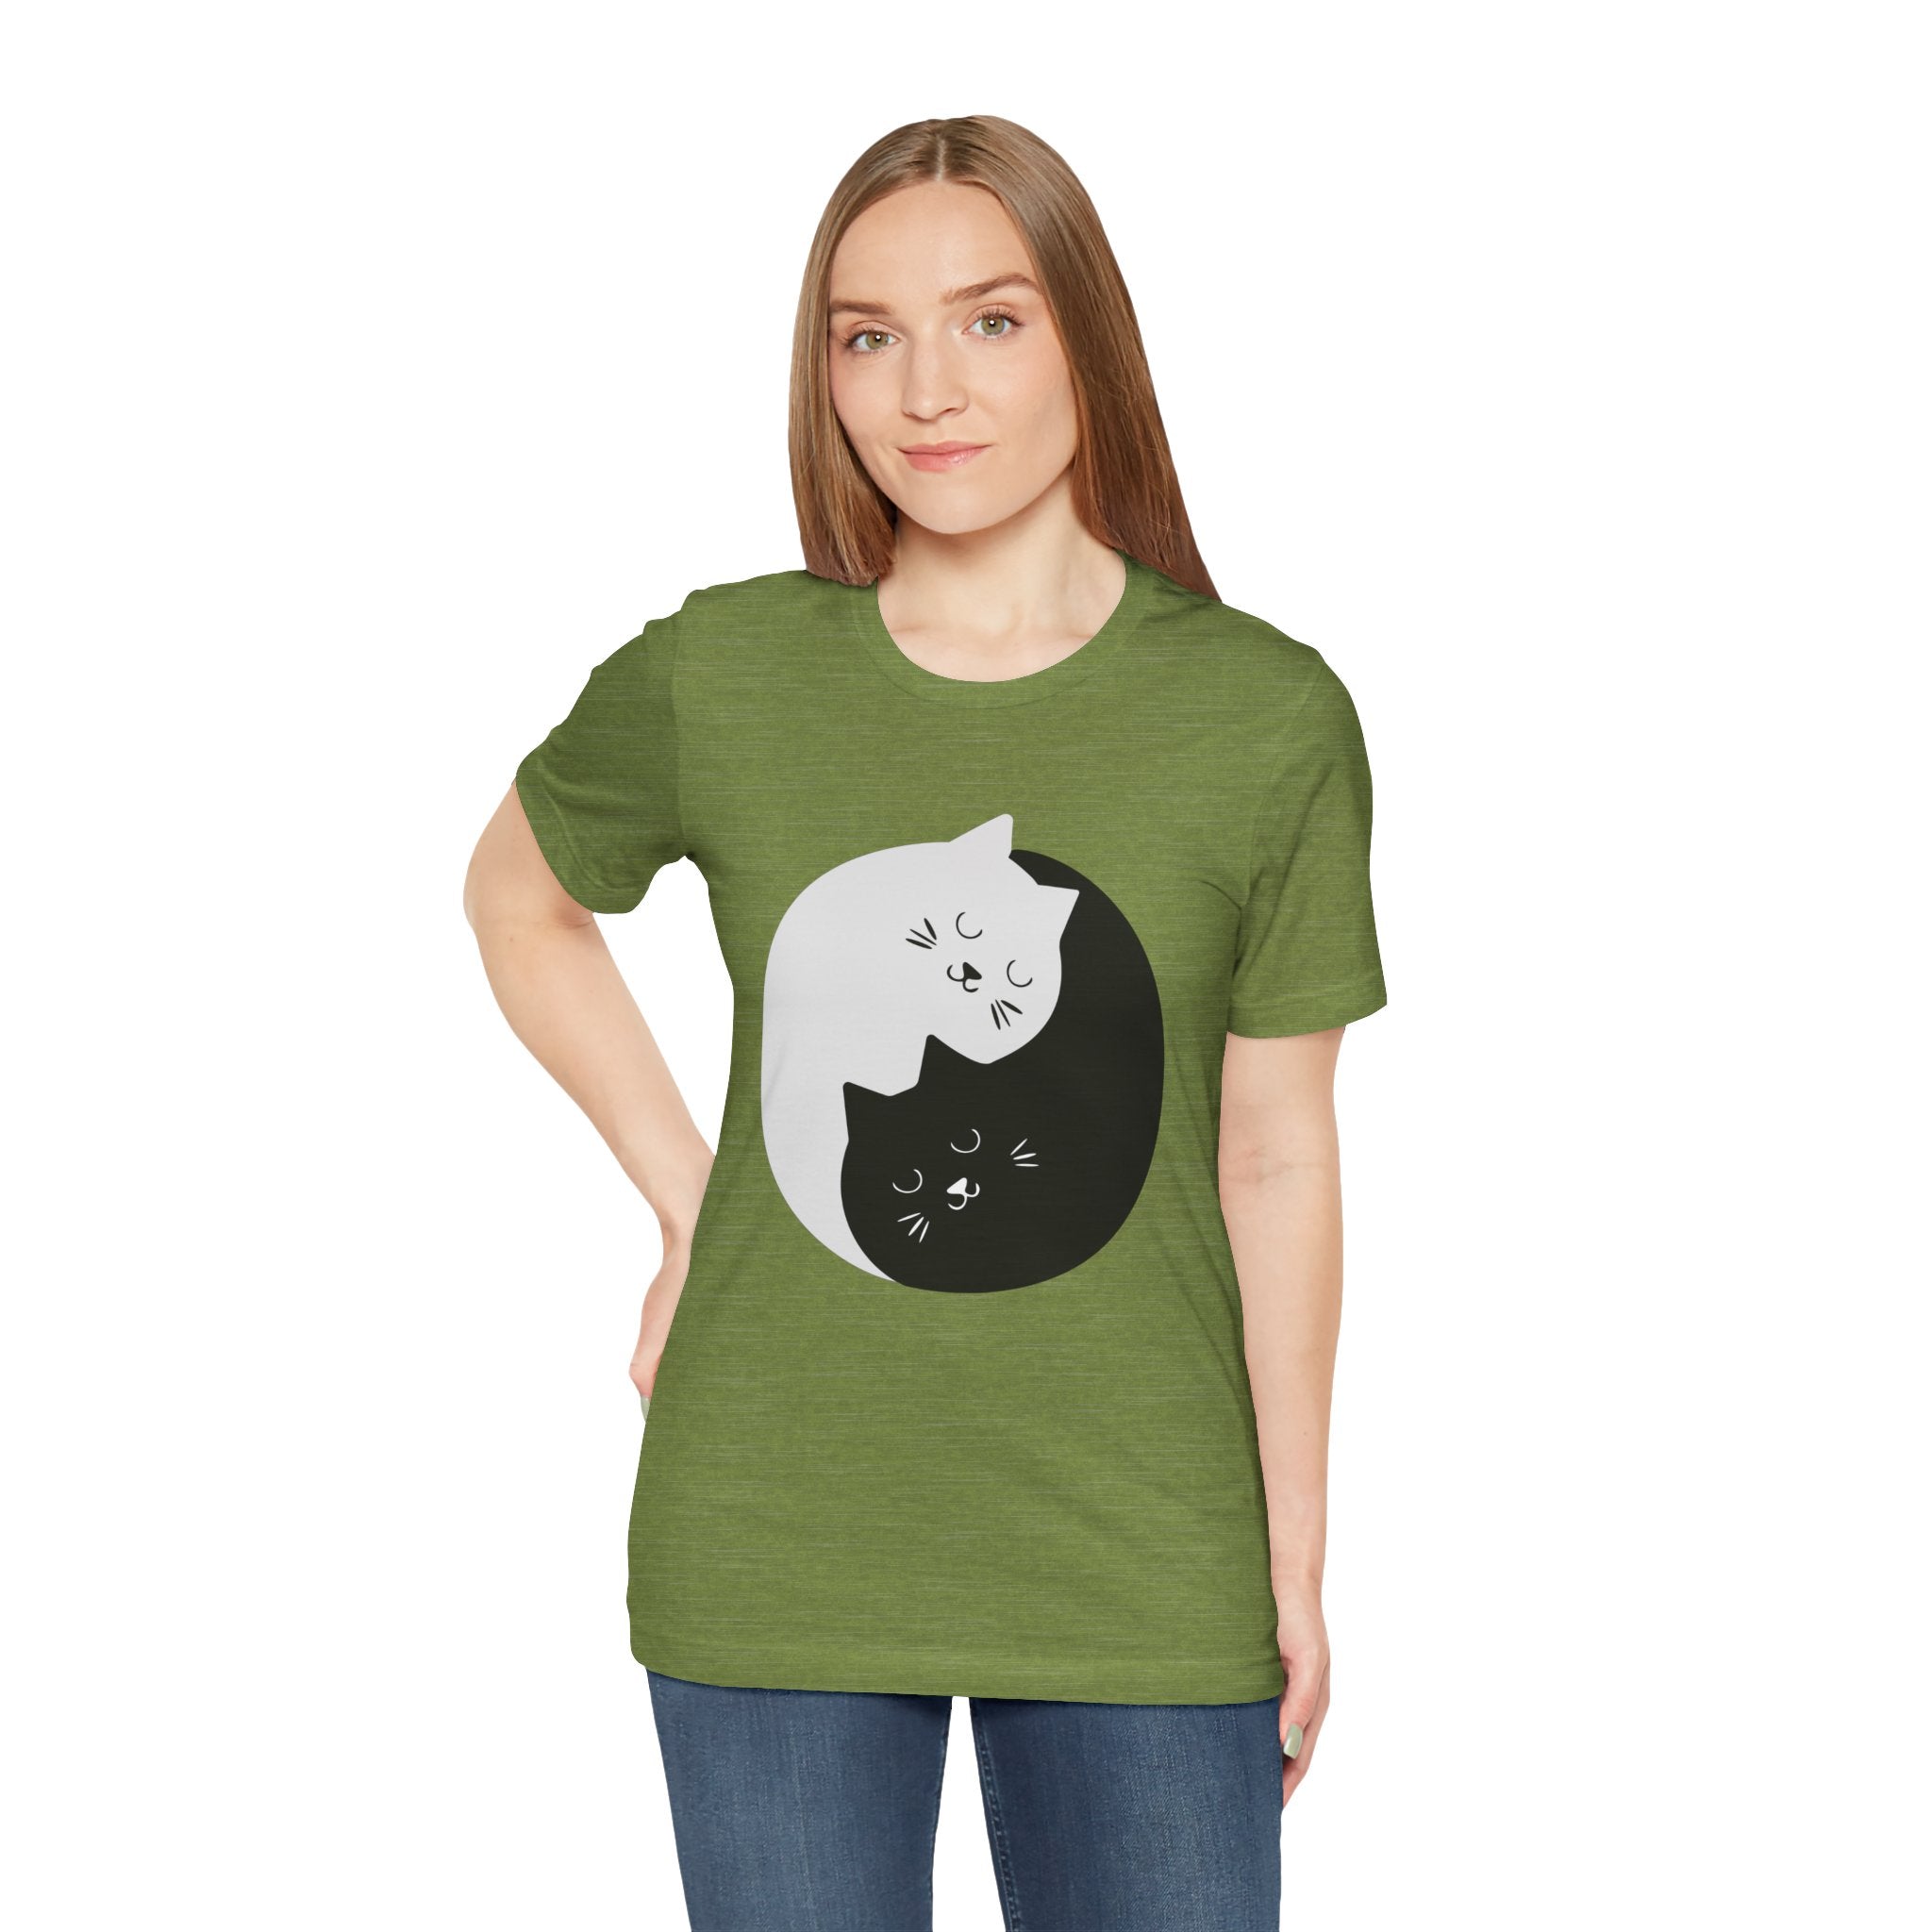 A woman in a YING-ANG KITTIES T-Shirt featuring a graphic of a white and a black cat nestled together in a Ying & Yang Kitties design.